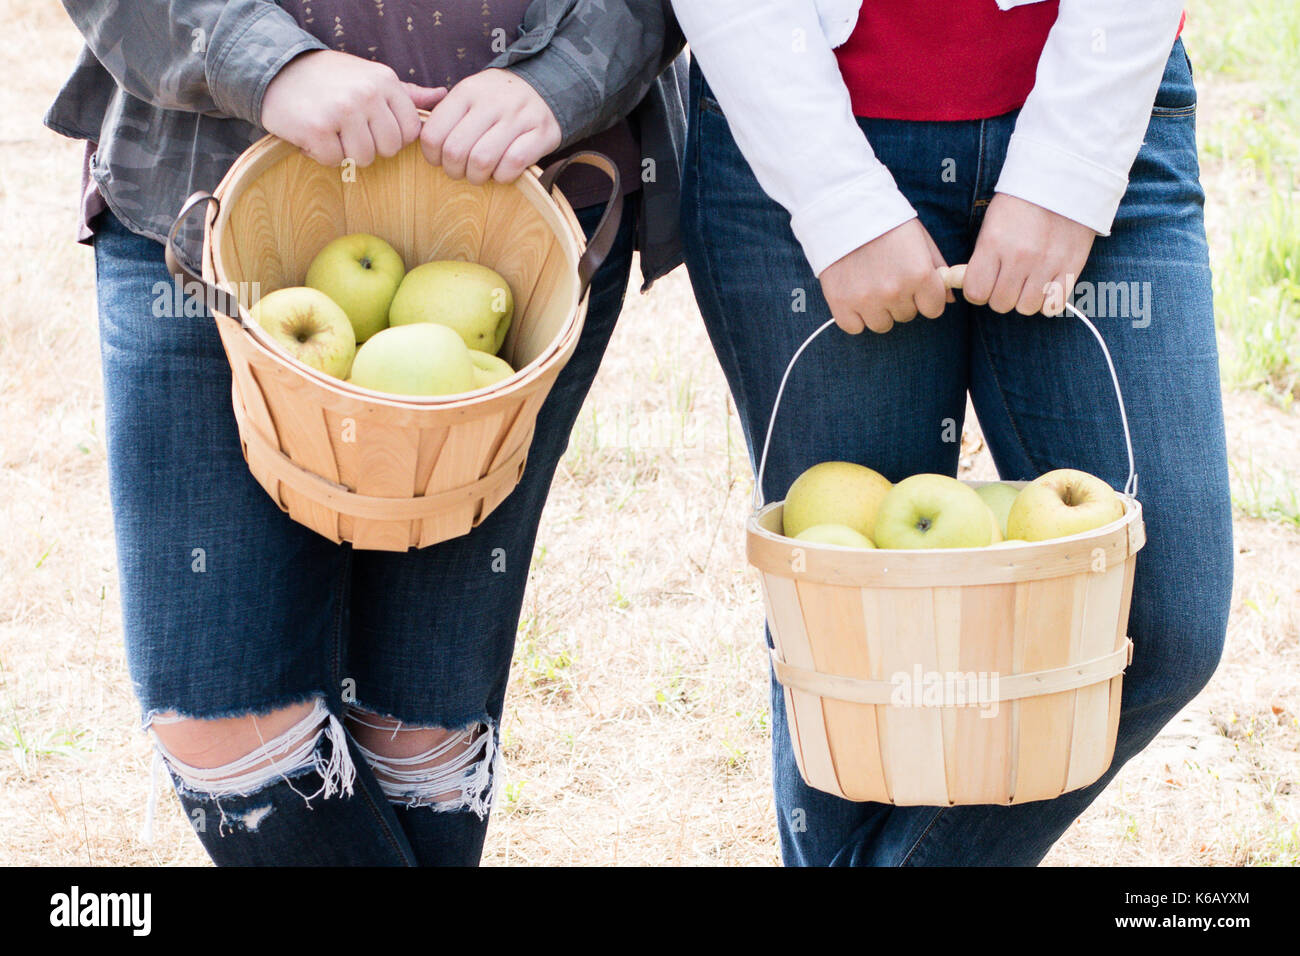 Two women girls holding wooden baskets of apples they picked themselves at an orchard in the fall Stock Photo